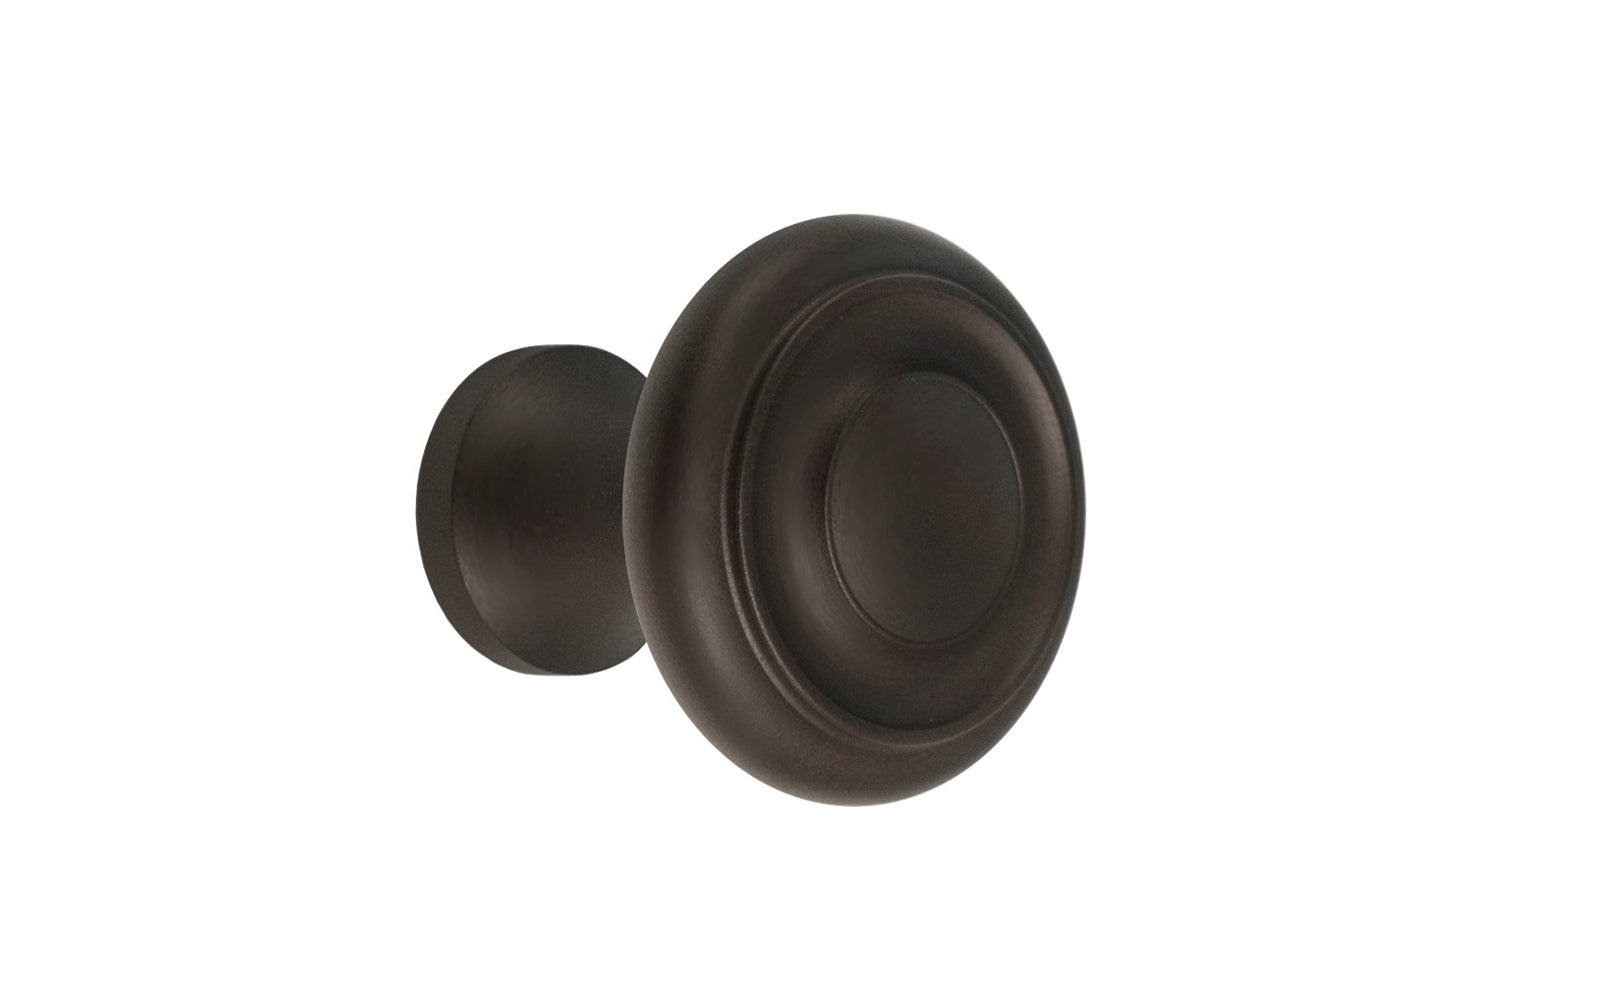 Vintage-style Hardware · Solid Brass classic contemporary / art deco, mid-century style cabinet knob. High quality solid brass 1" diameter Knob. Ideal for kitchen & bathroom cabinets, & furniture. Oil rubbed bronze finish.